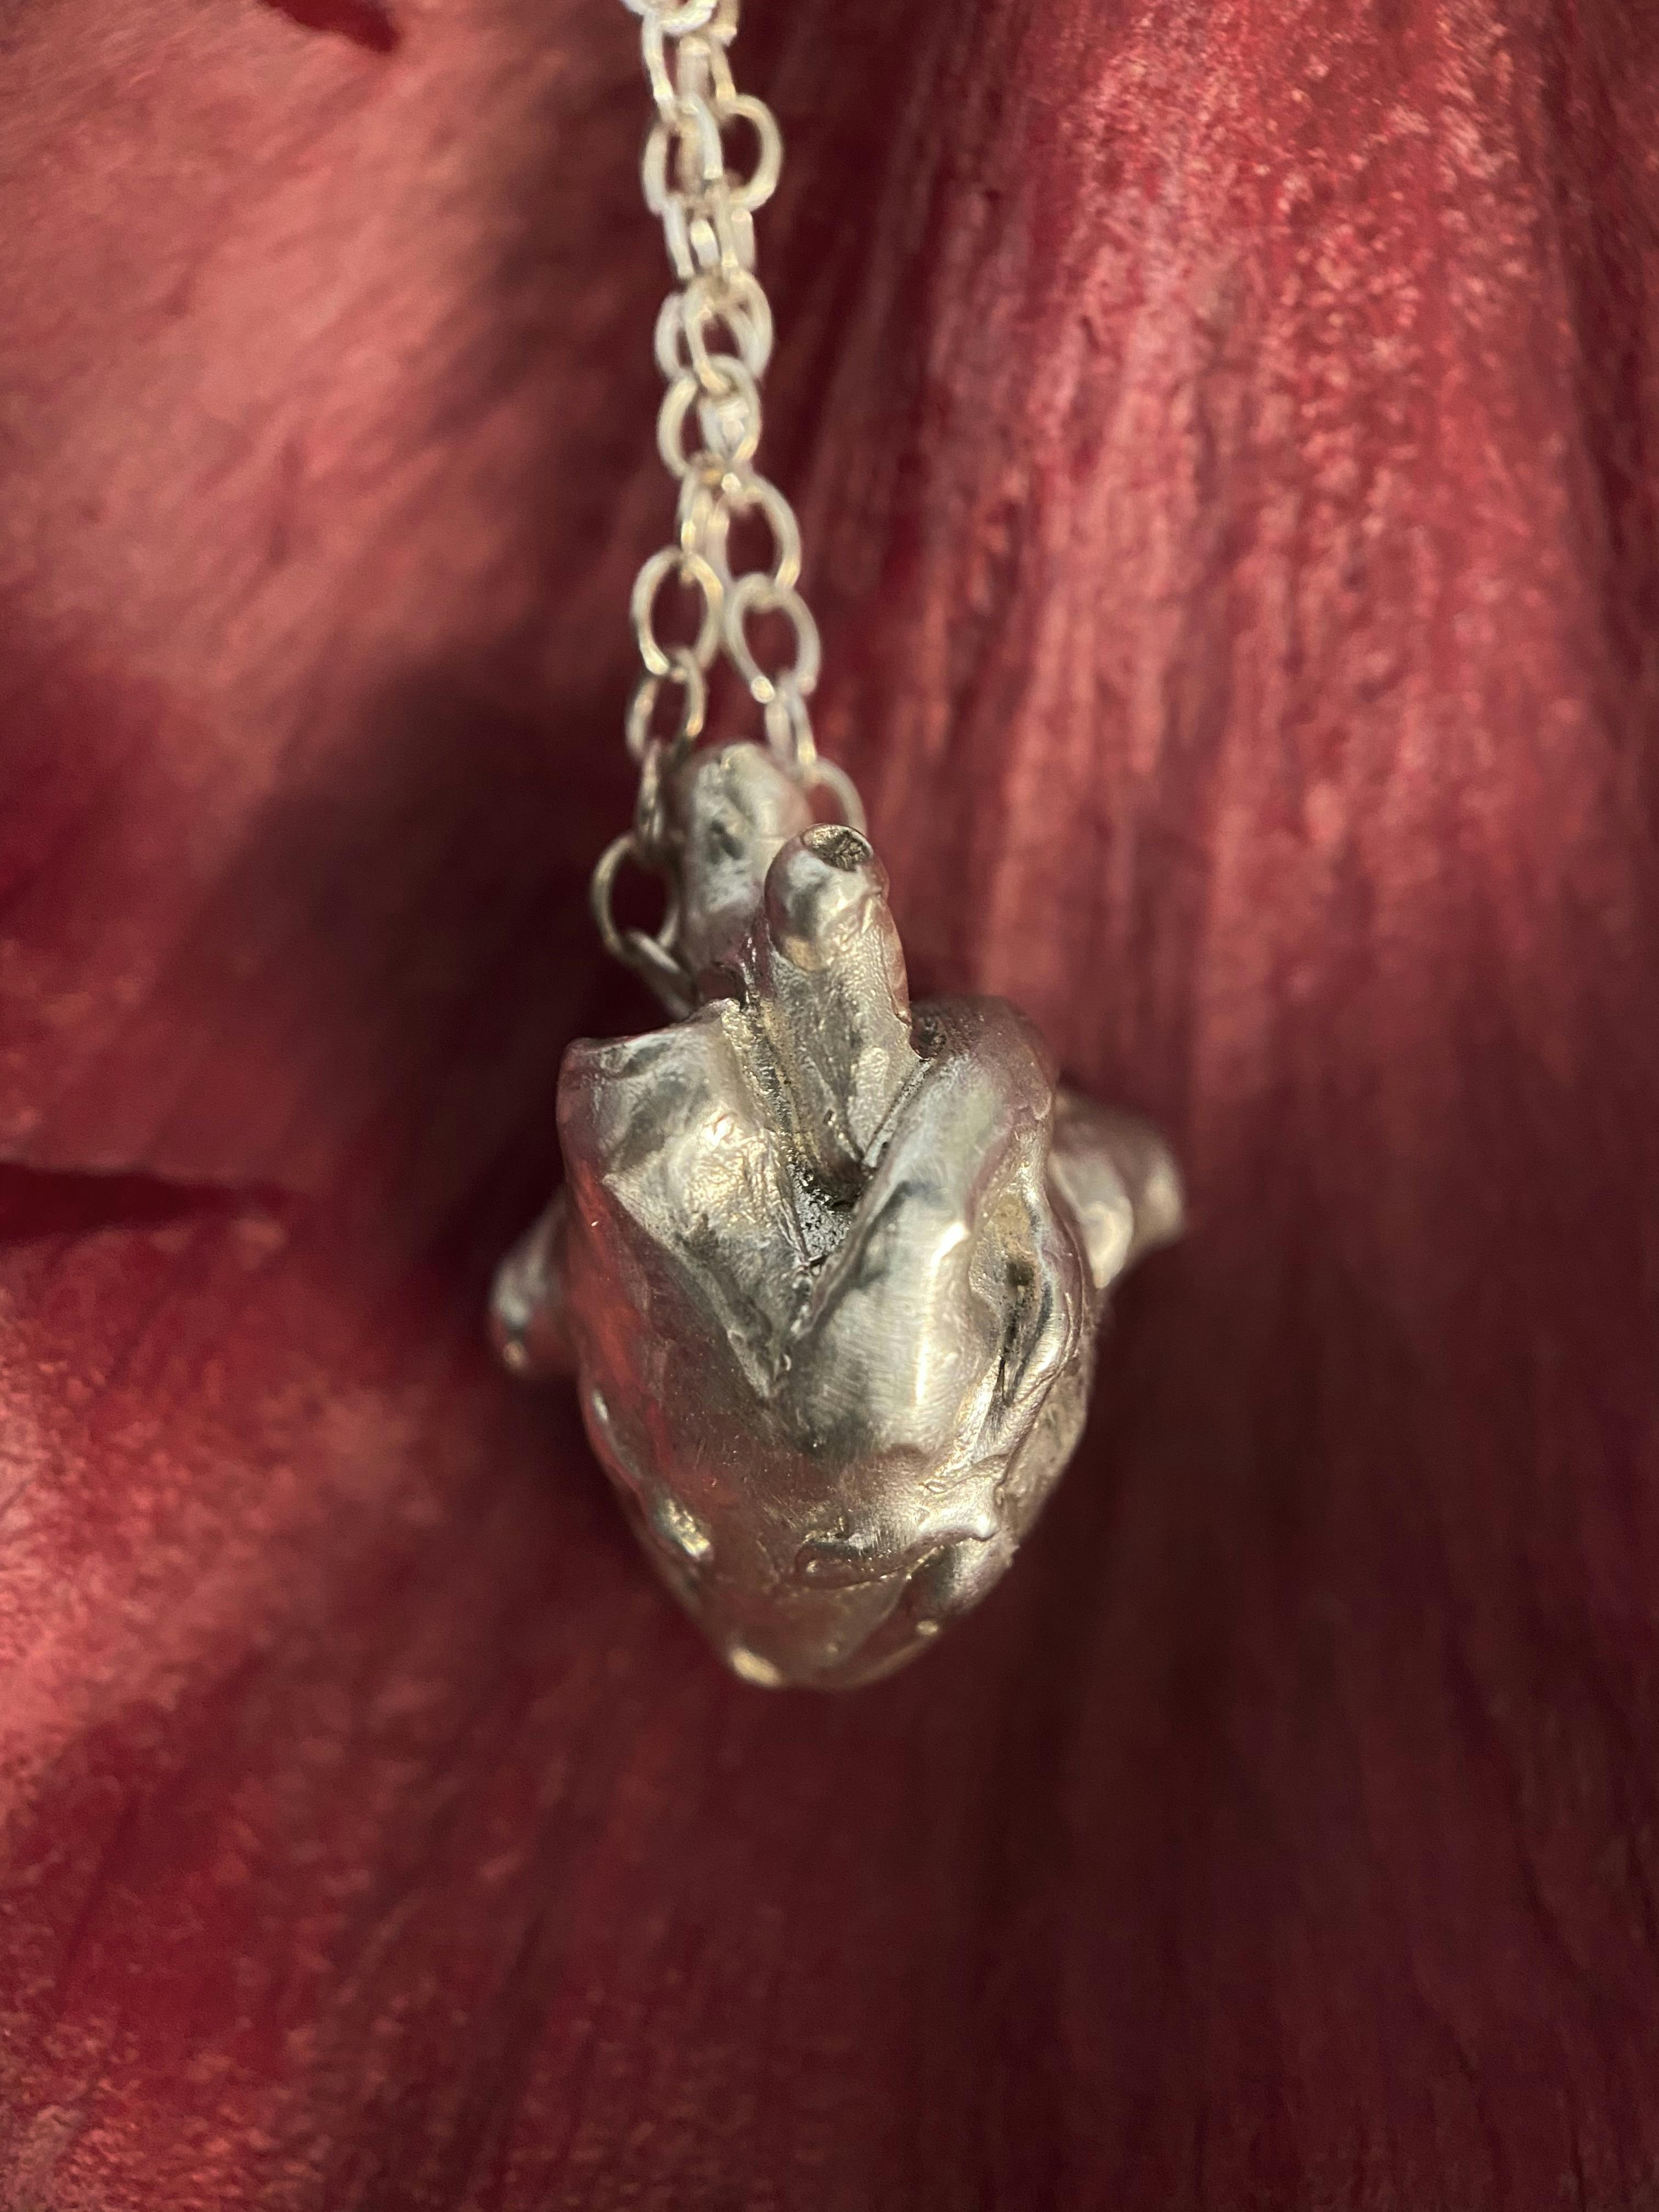 A close up photo of a small silver anatomical heart on a silver chain, laid on a petal.